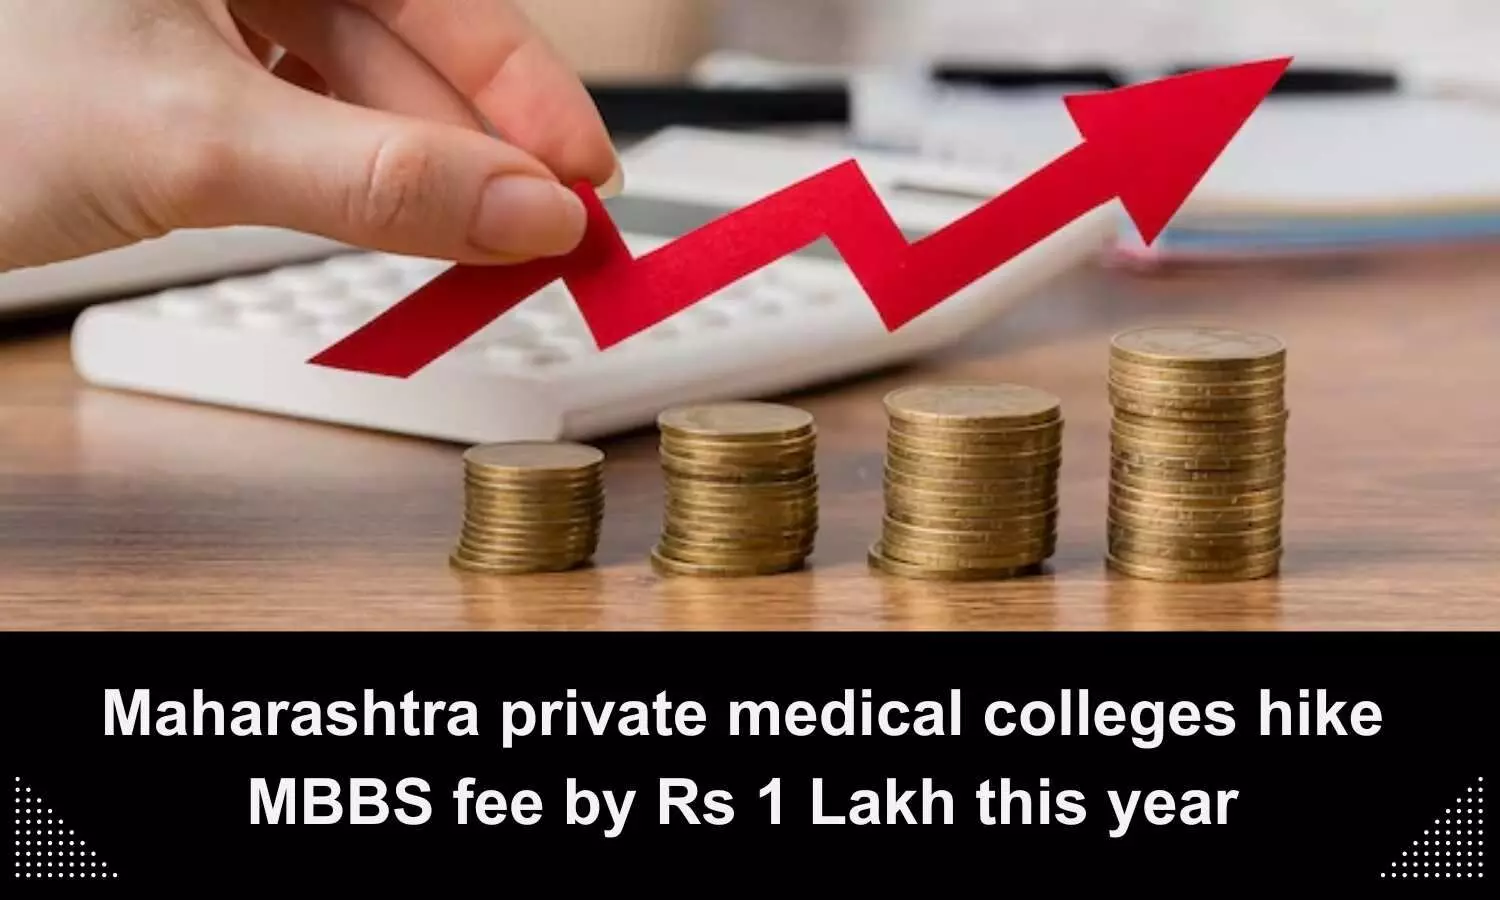 Fee for MBBS hike by Rs 1 lakh in Maharashtra private medical colleges this year